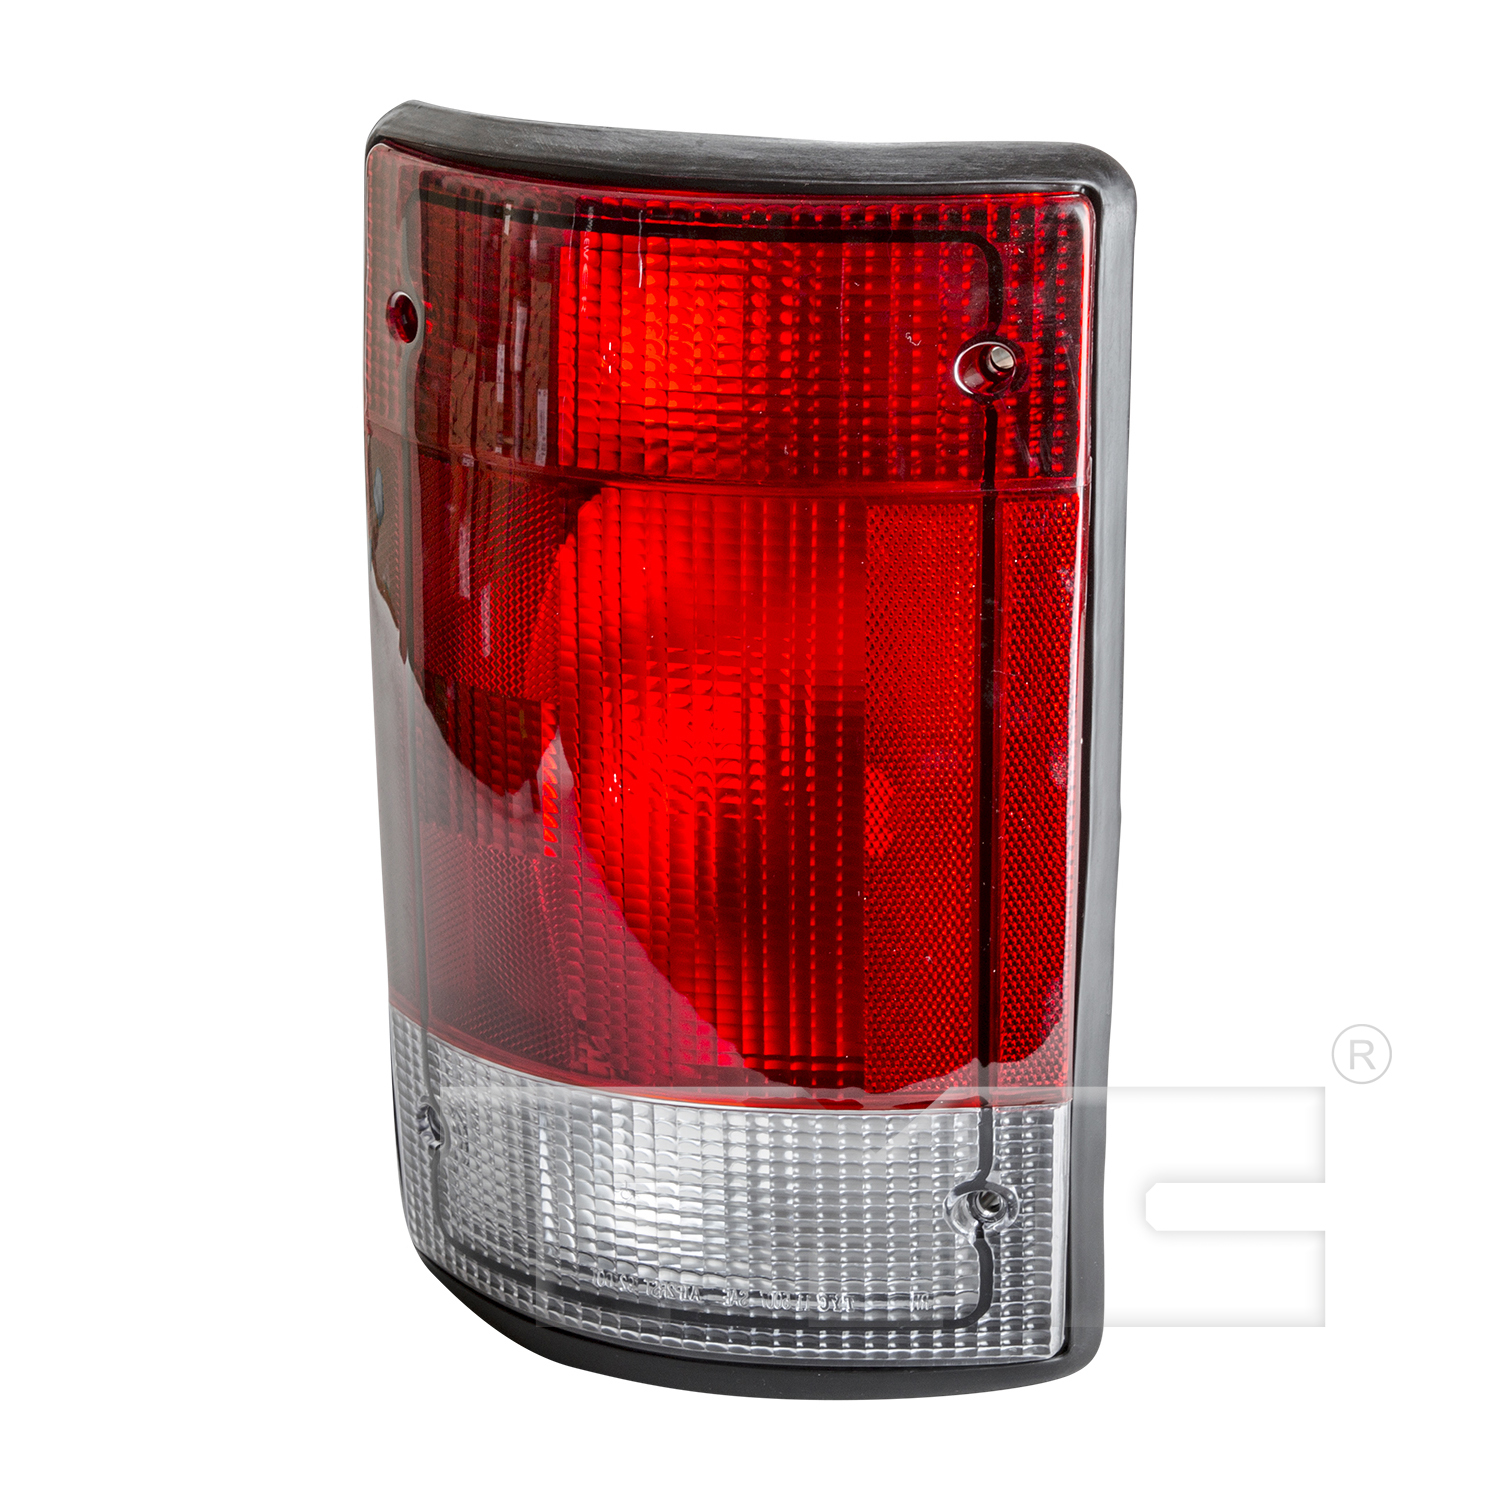 Aftermarket TAILLIGHTS for FORD - E-350 ECONOLINE, E-350 ECONOLINE,95-98,LT Taillamp assy